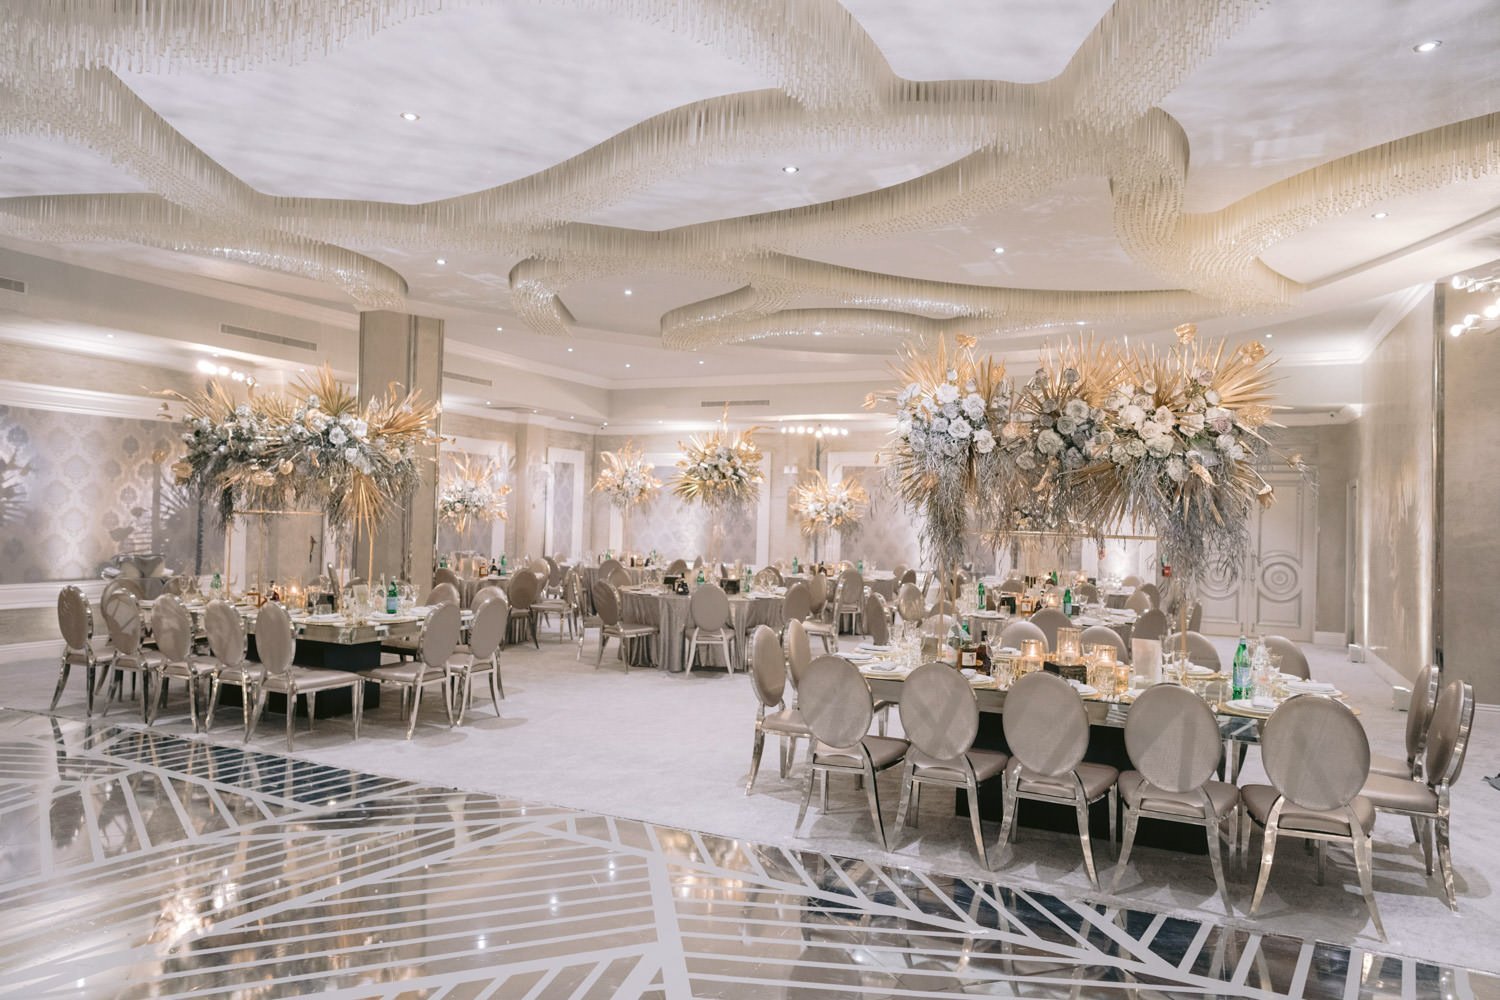 3 Tips for Designing a Party with Gold, Silver & Metallic Decor